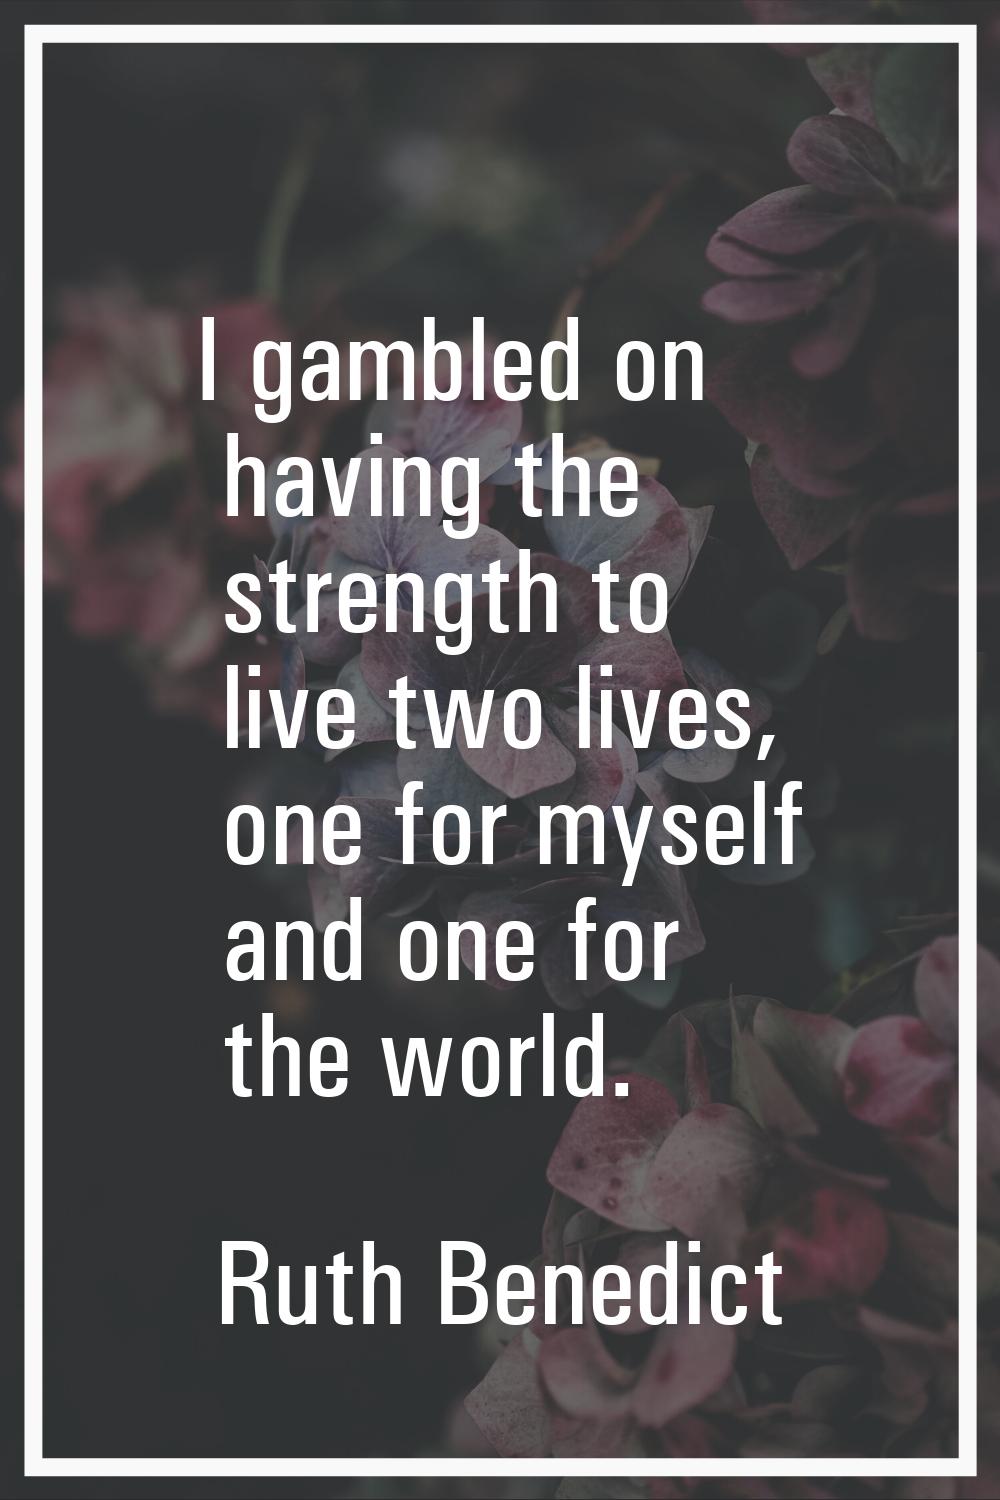 I gambled on having the strength to live two lives, one for myself and one for the world.